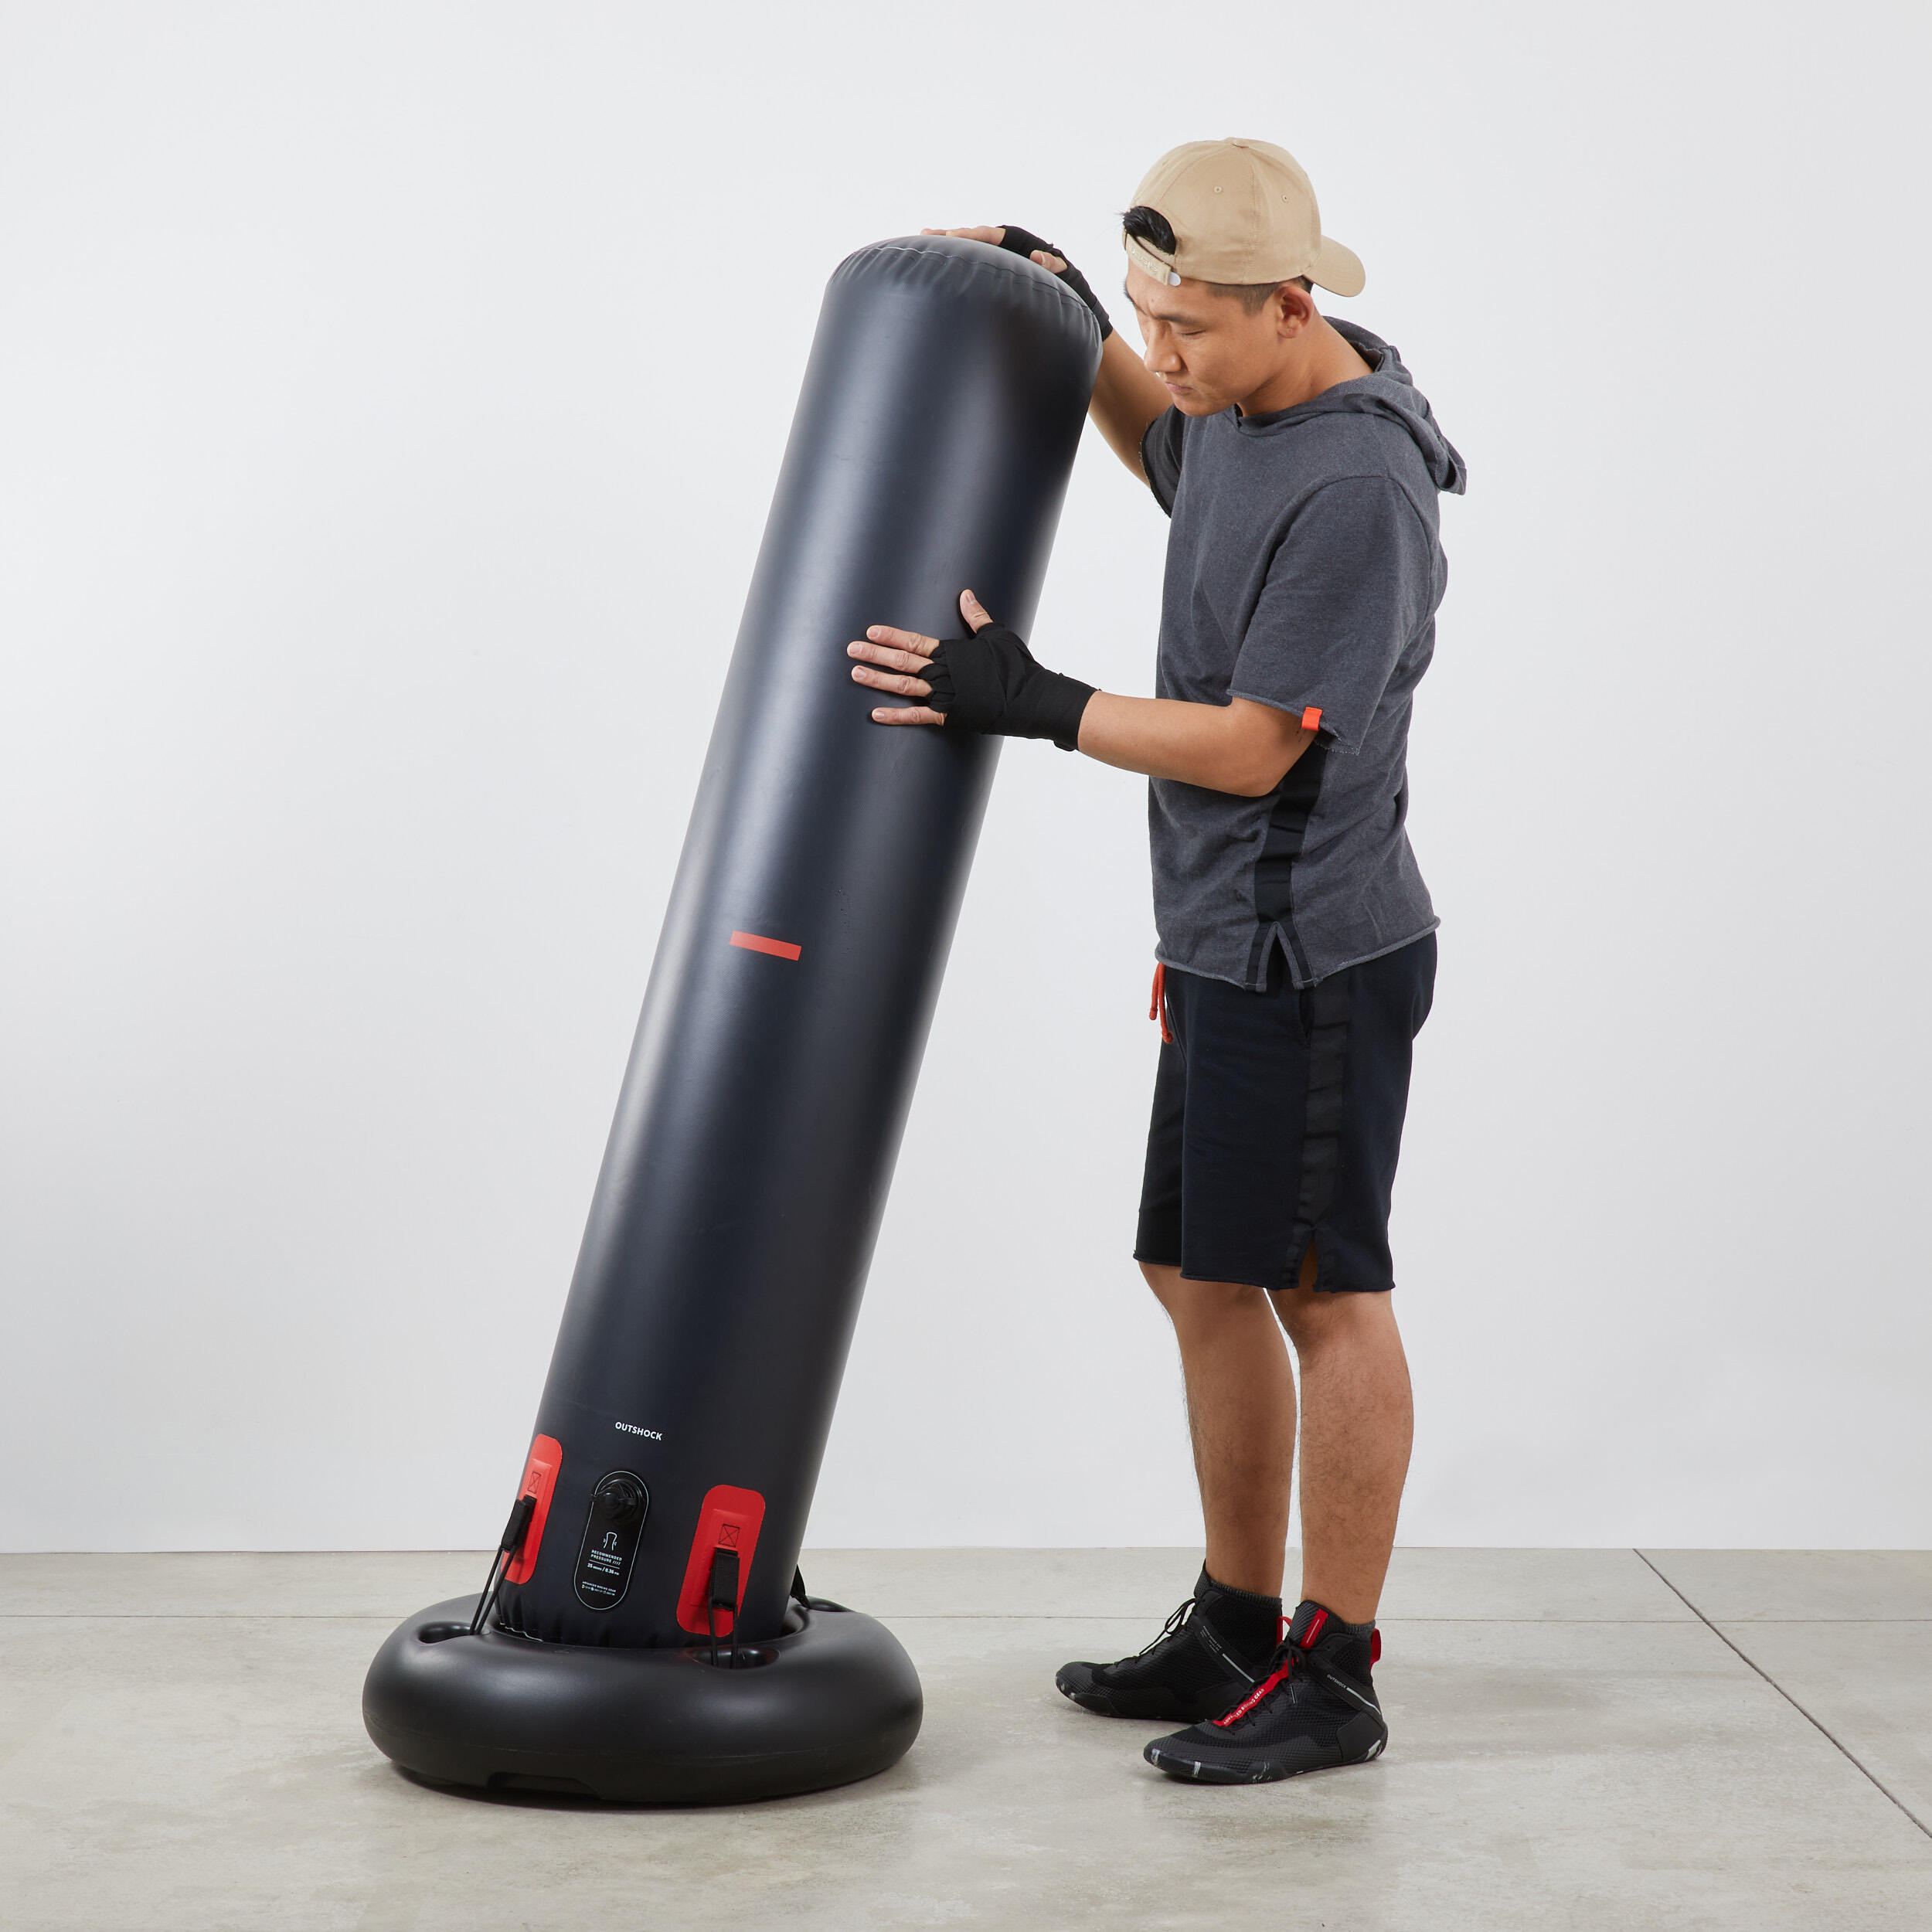 Can a Punching Bag Workout Help Tone Your Abs? | livestrong